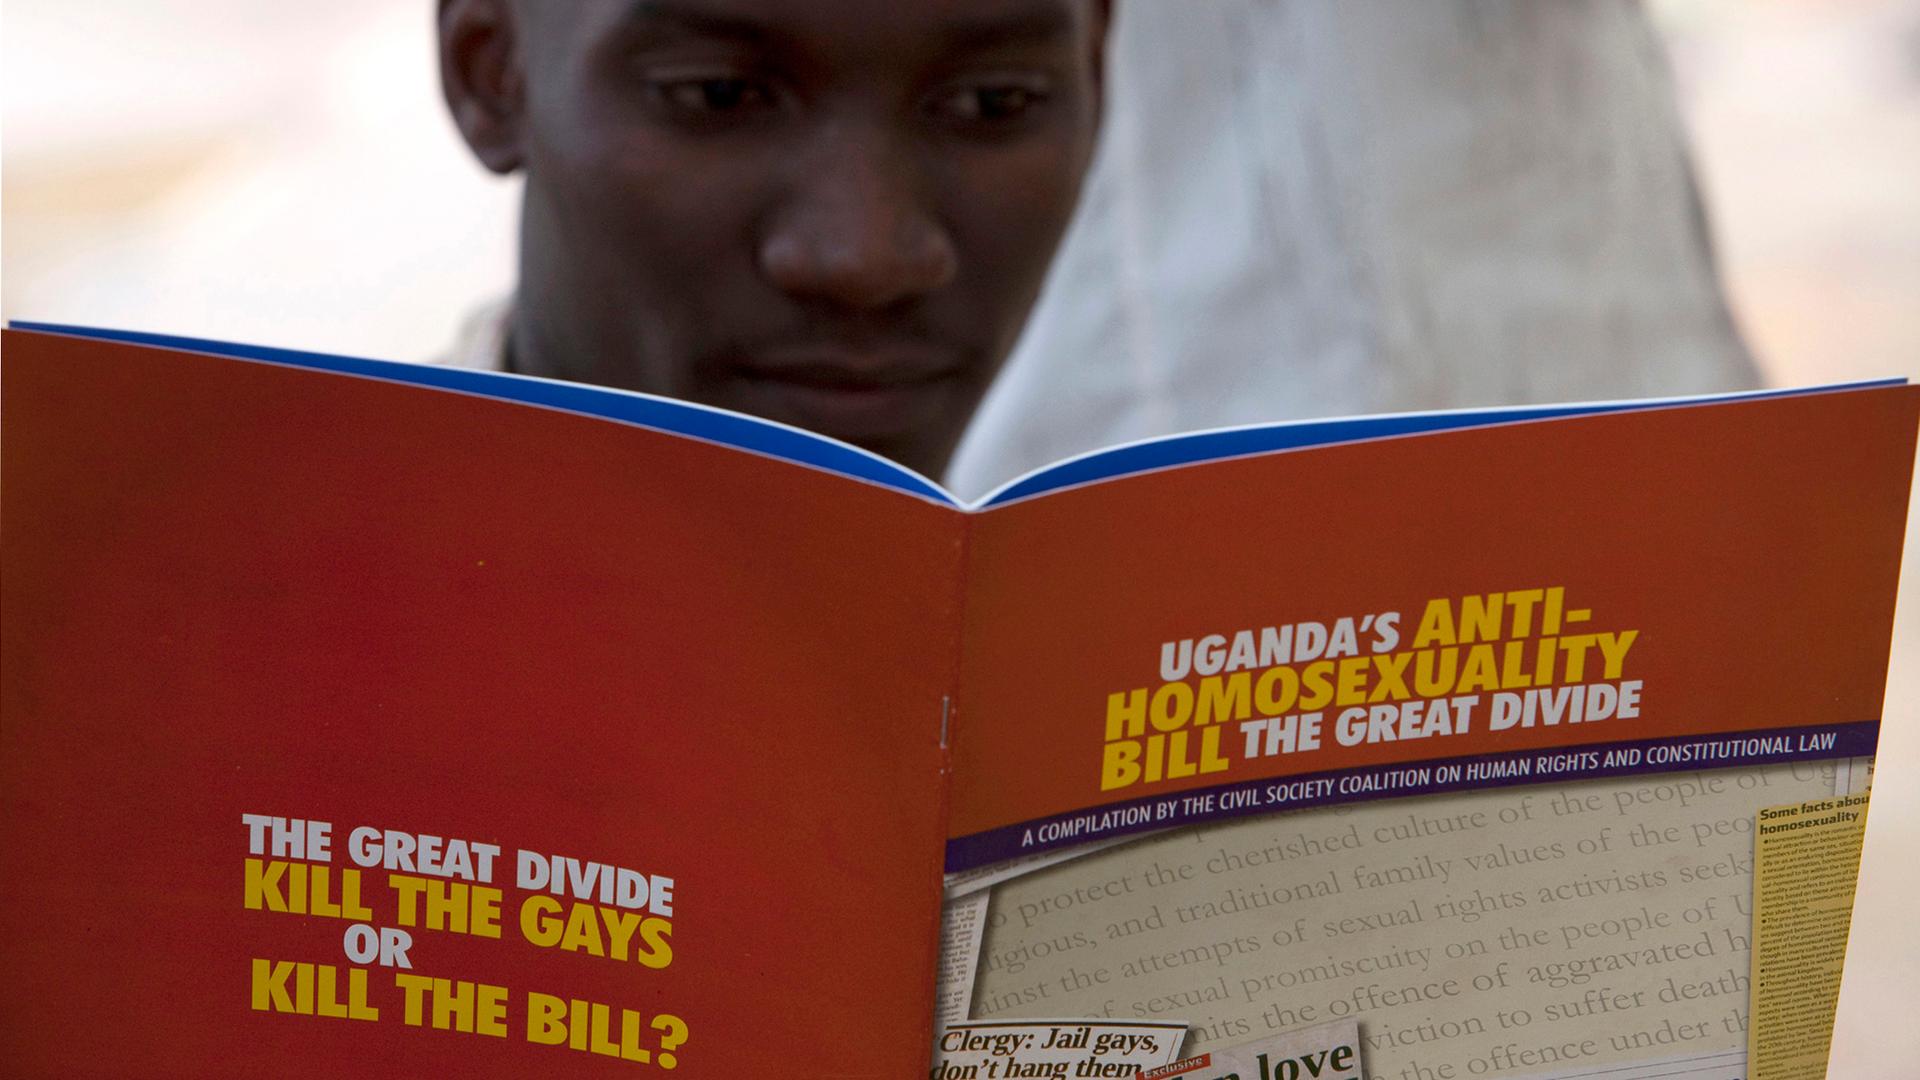 A man reads a publication by a civil society coalition on human rights and constitutional law in Kampala.